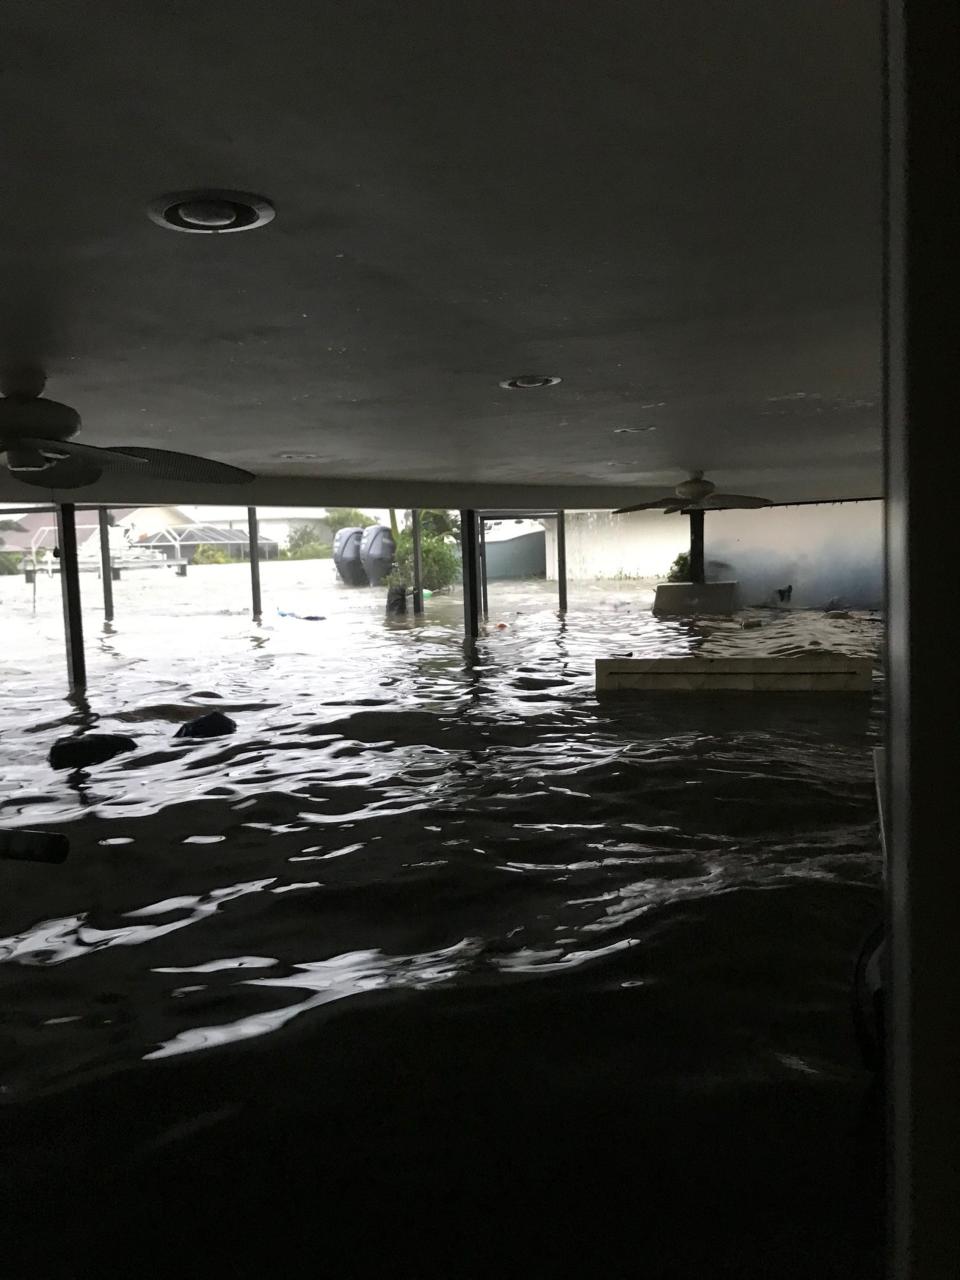 Southwest Florida residents Peggy and Bruce Zachritz tied themselves to the front porch during Hurricane Ian as water rushed into their south Fort Myers home.